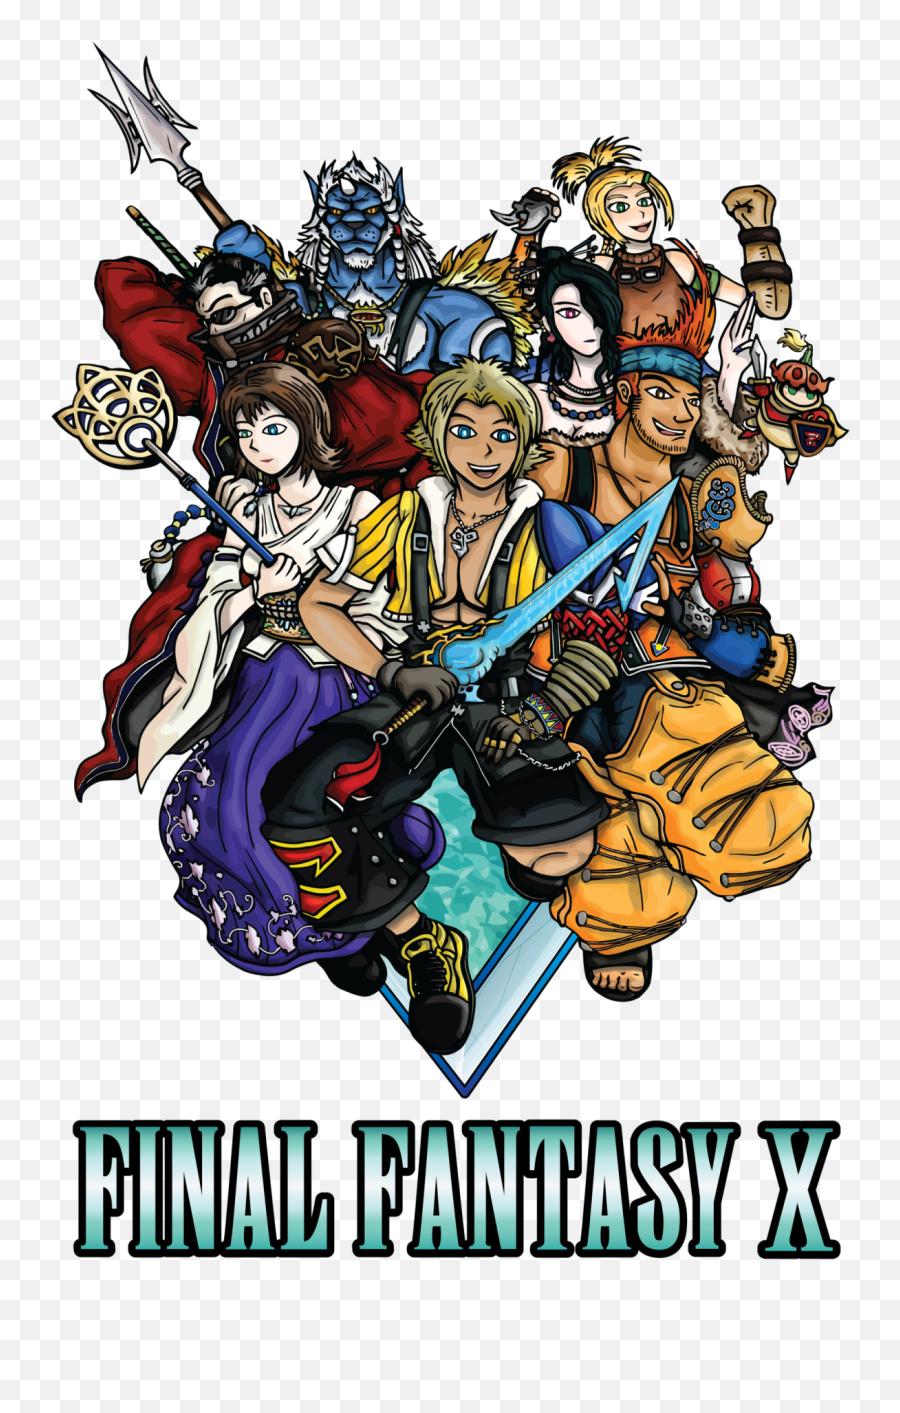 Searching For Auron - Fictional Character Emoji,Final Fantasy X-2 World Of Emotion